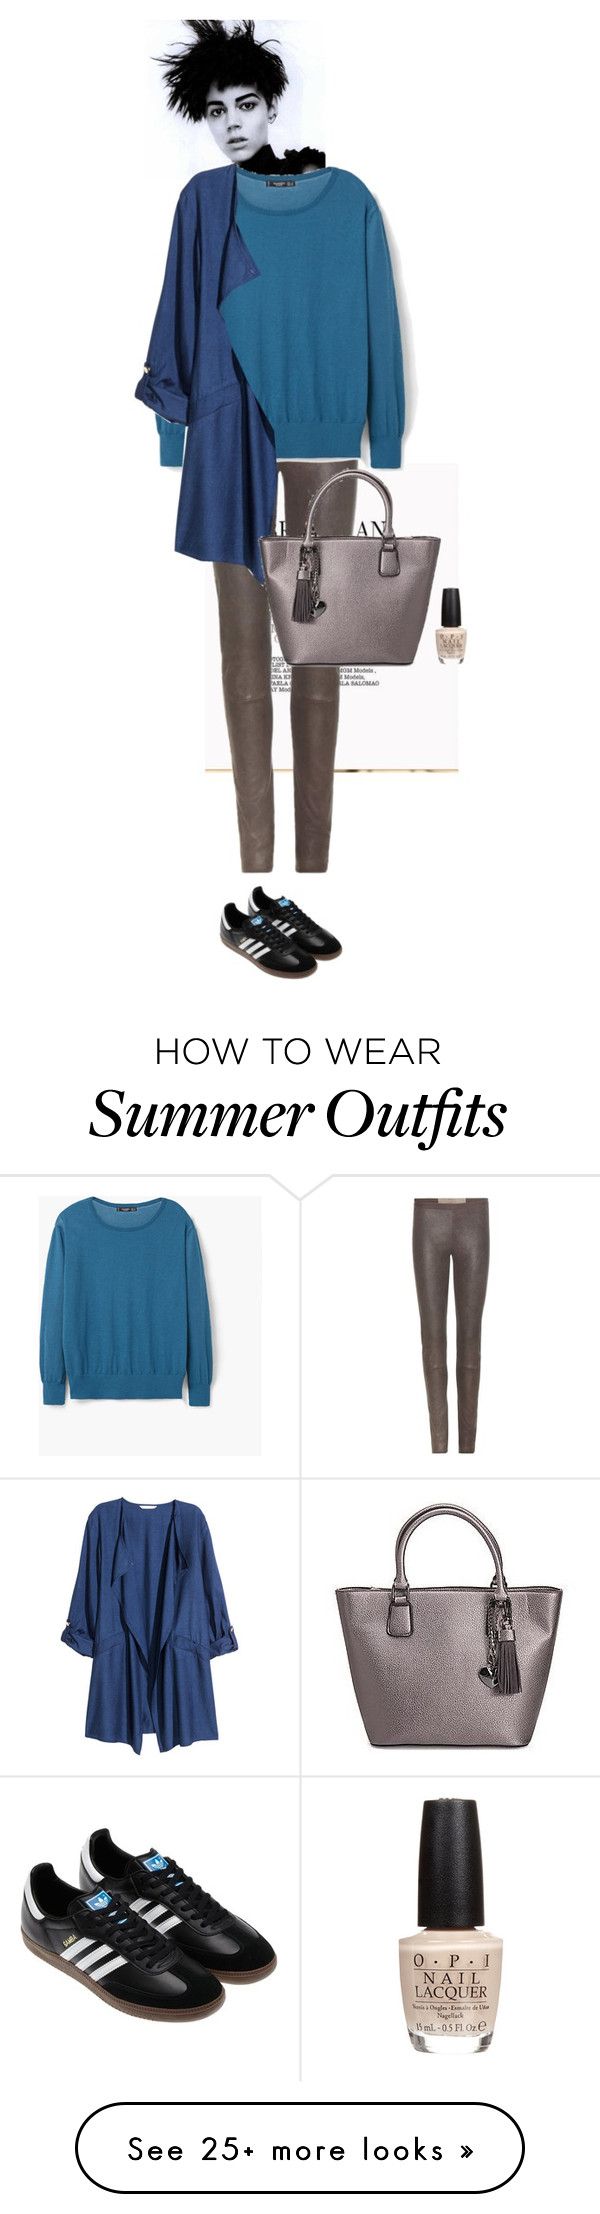 "my real outfit today" by akchen on Polyvore featuring Rick Owens, MAN...